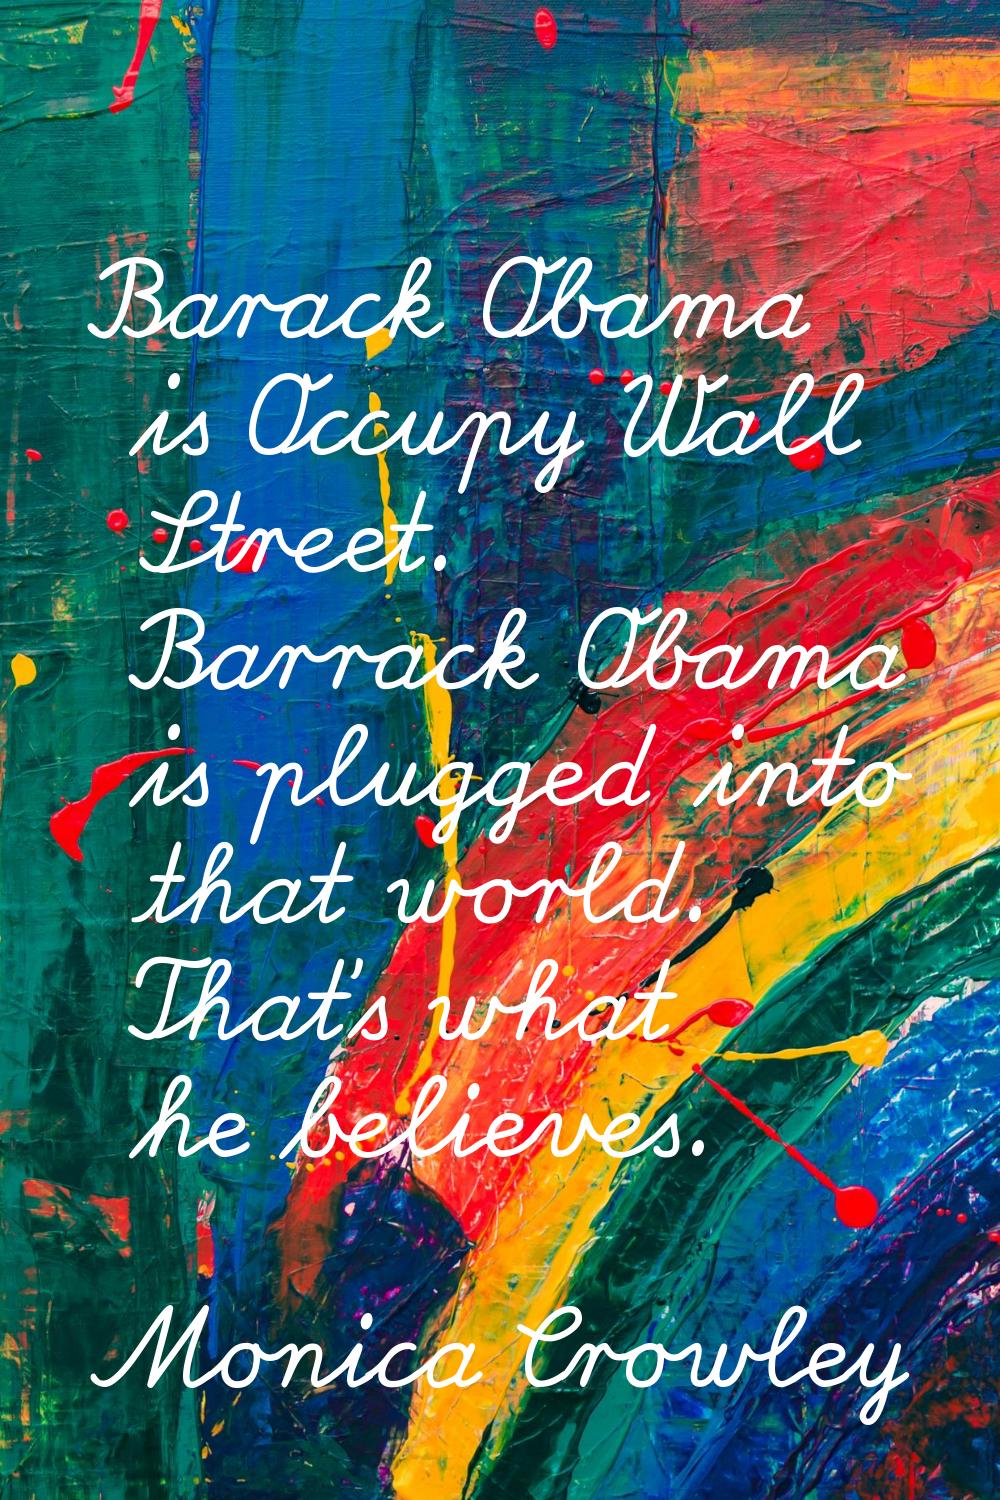 Barack Obama is Occupy Wall Street. Barrack Obama is plugged into that world. That's what he believ